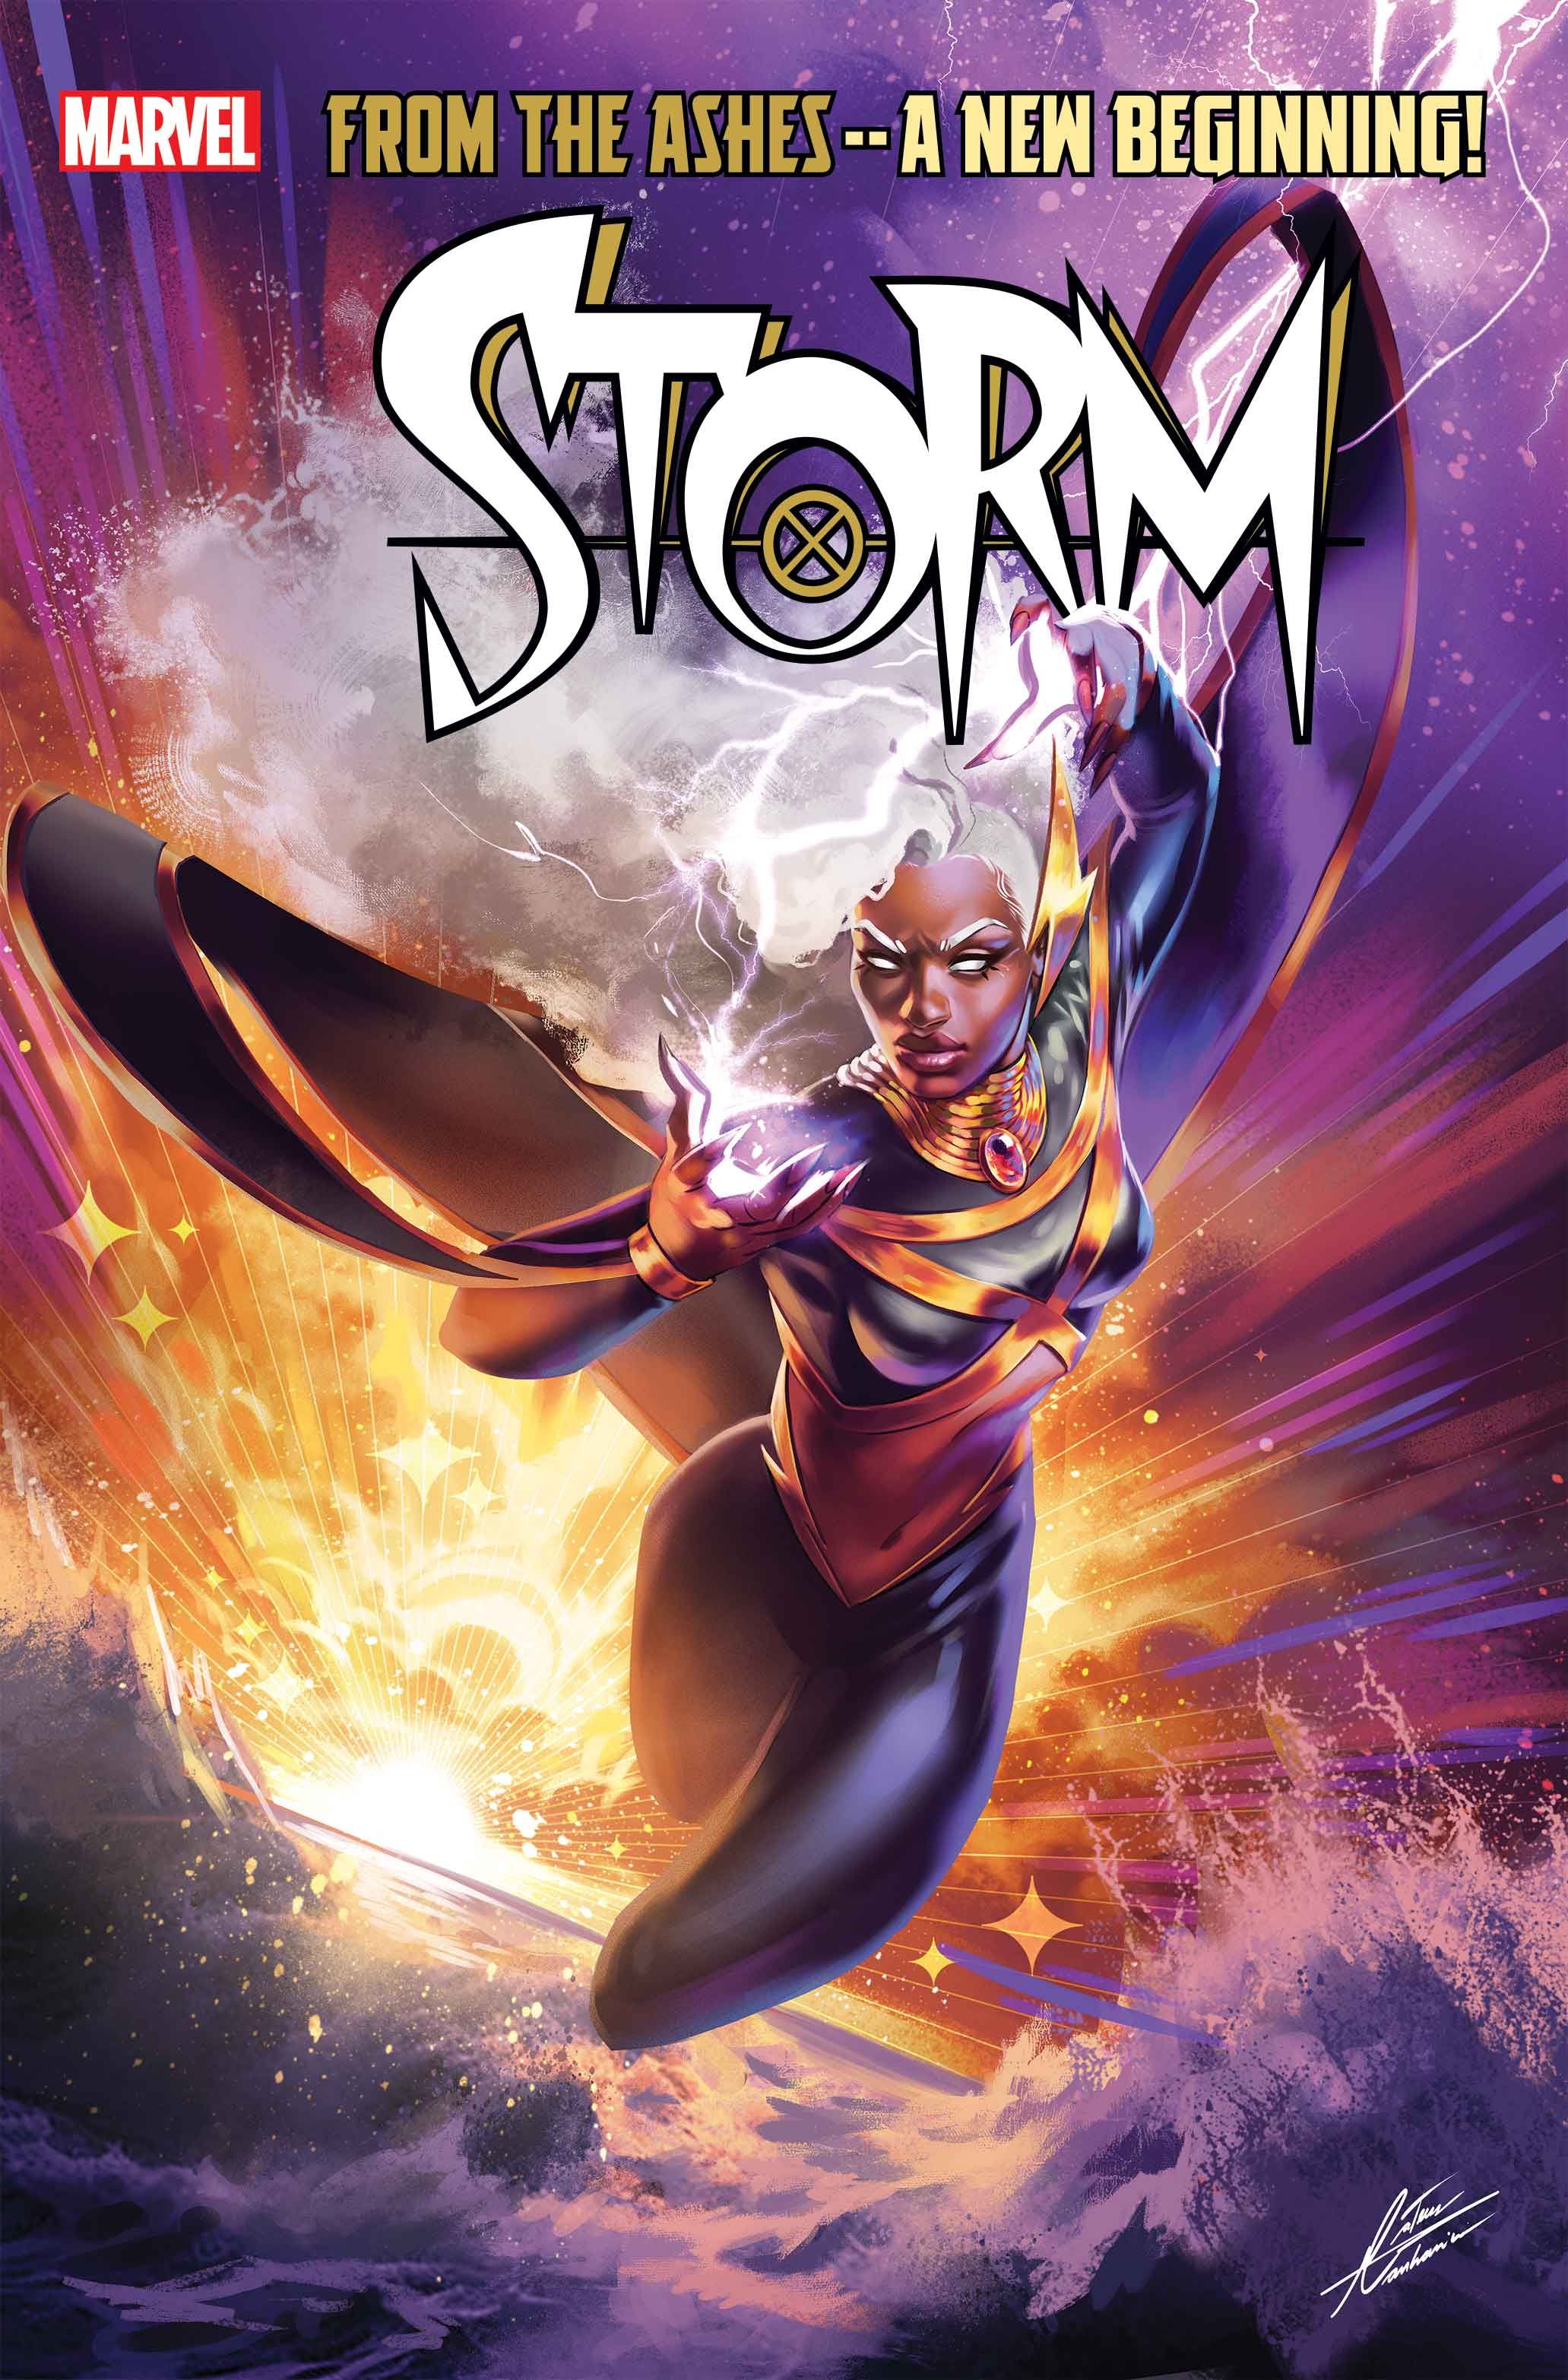 The cover of Storm #1